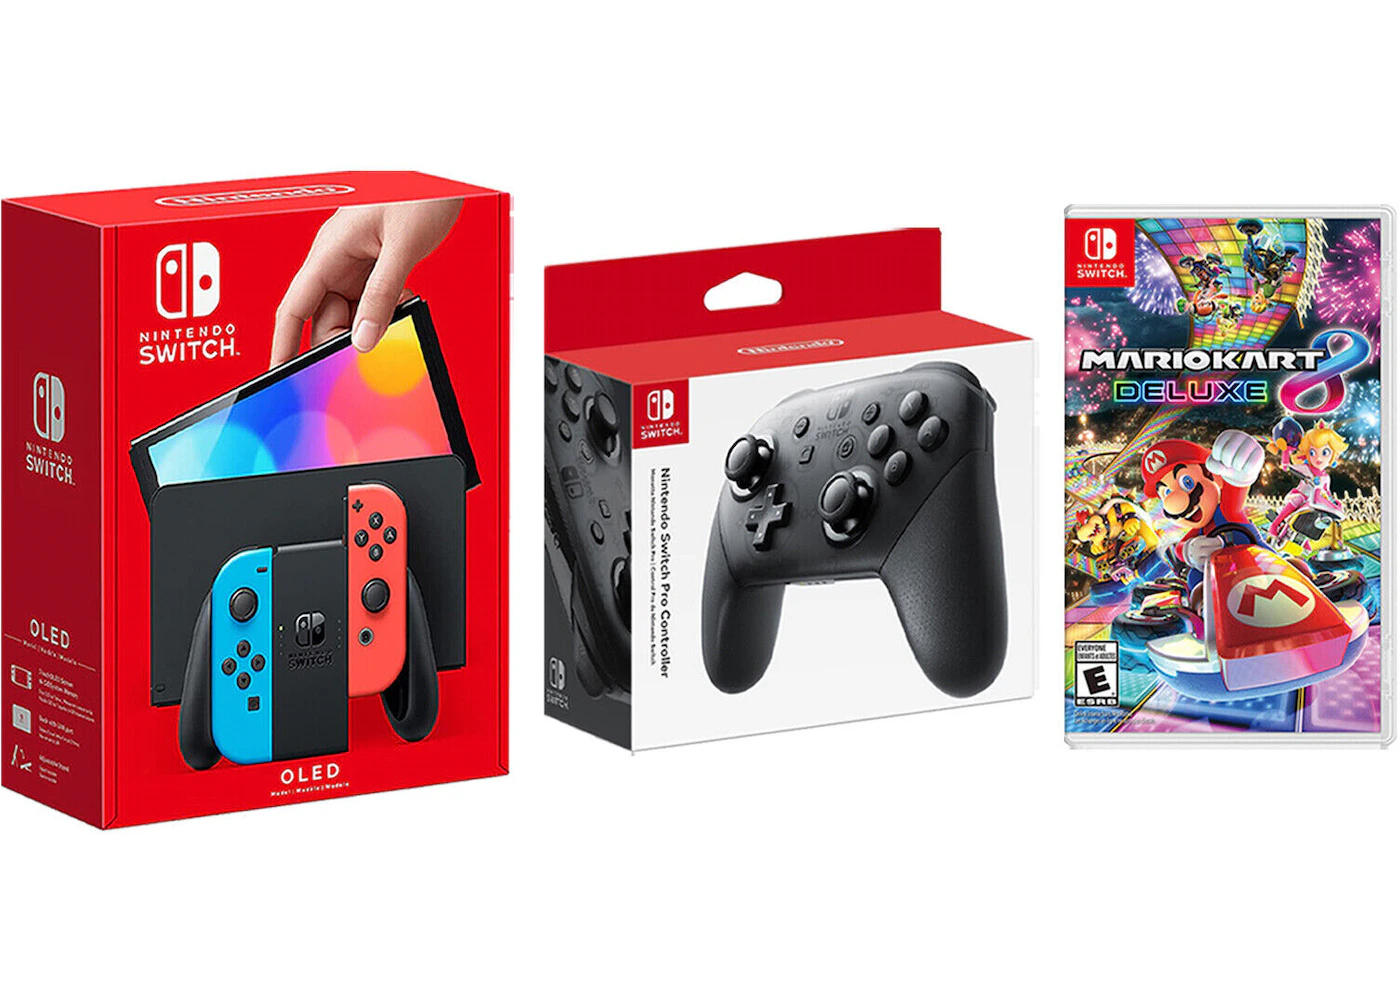 Nintendo Switch OLED with Controller and Mario Kart 8 Deluxe Game Bundle NS-HEGSKABAA Neon Blue/Neon Red - US